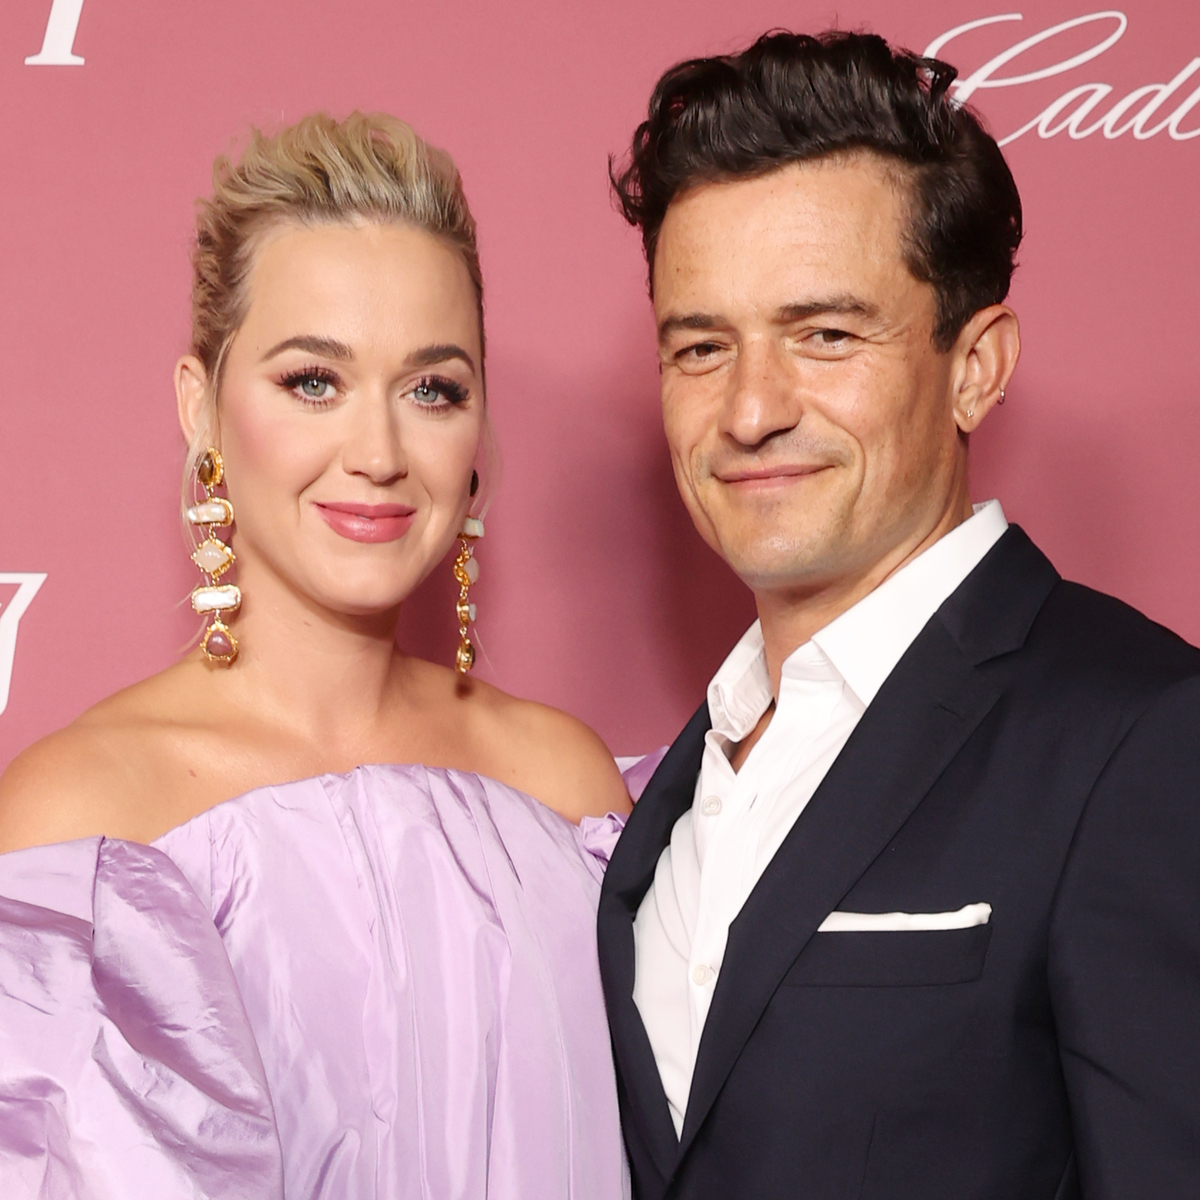 Katy Perry EXCLUSIVE: Singer shows off post-baby body, holds daughter with  Orlando Bloom